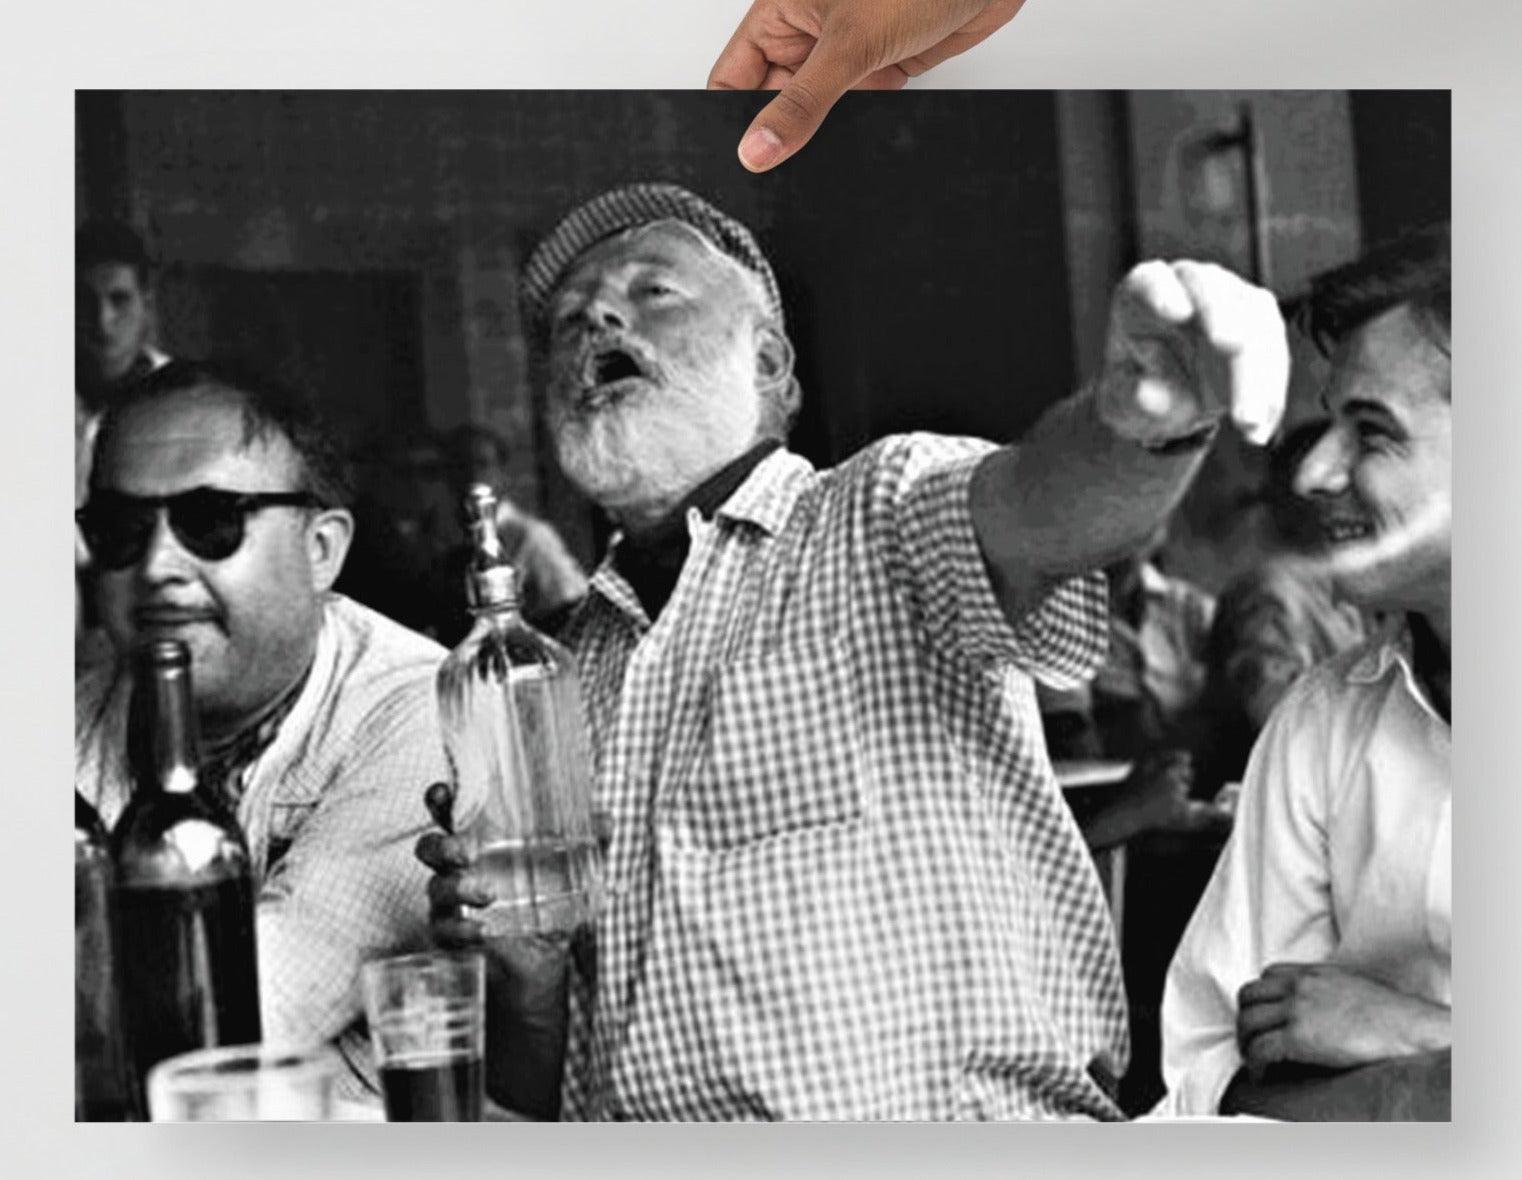 An Ernest Hemingway at a Bar  poster on a plain backdrop in size 18x24”.